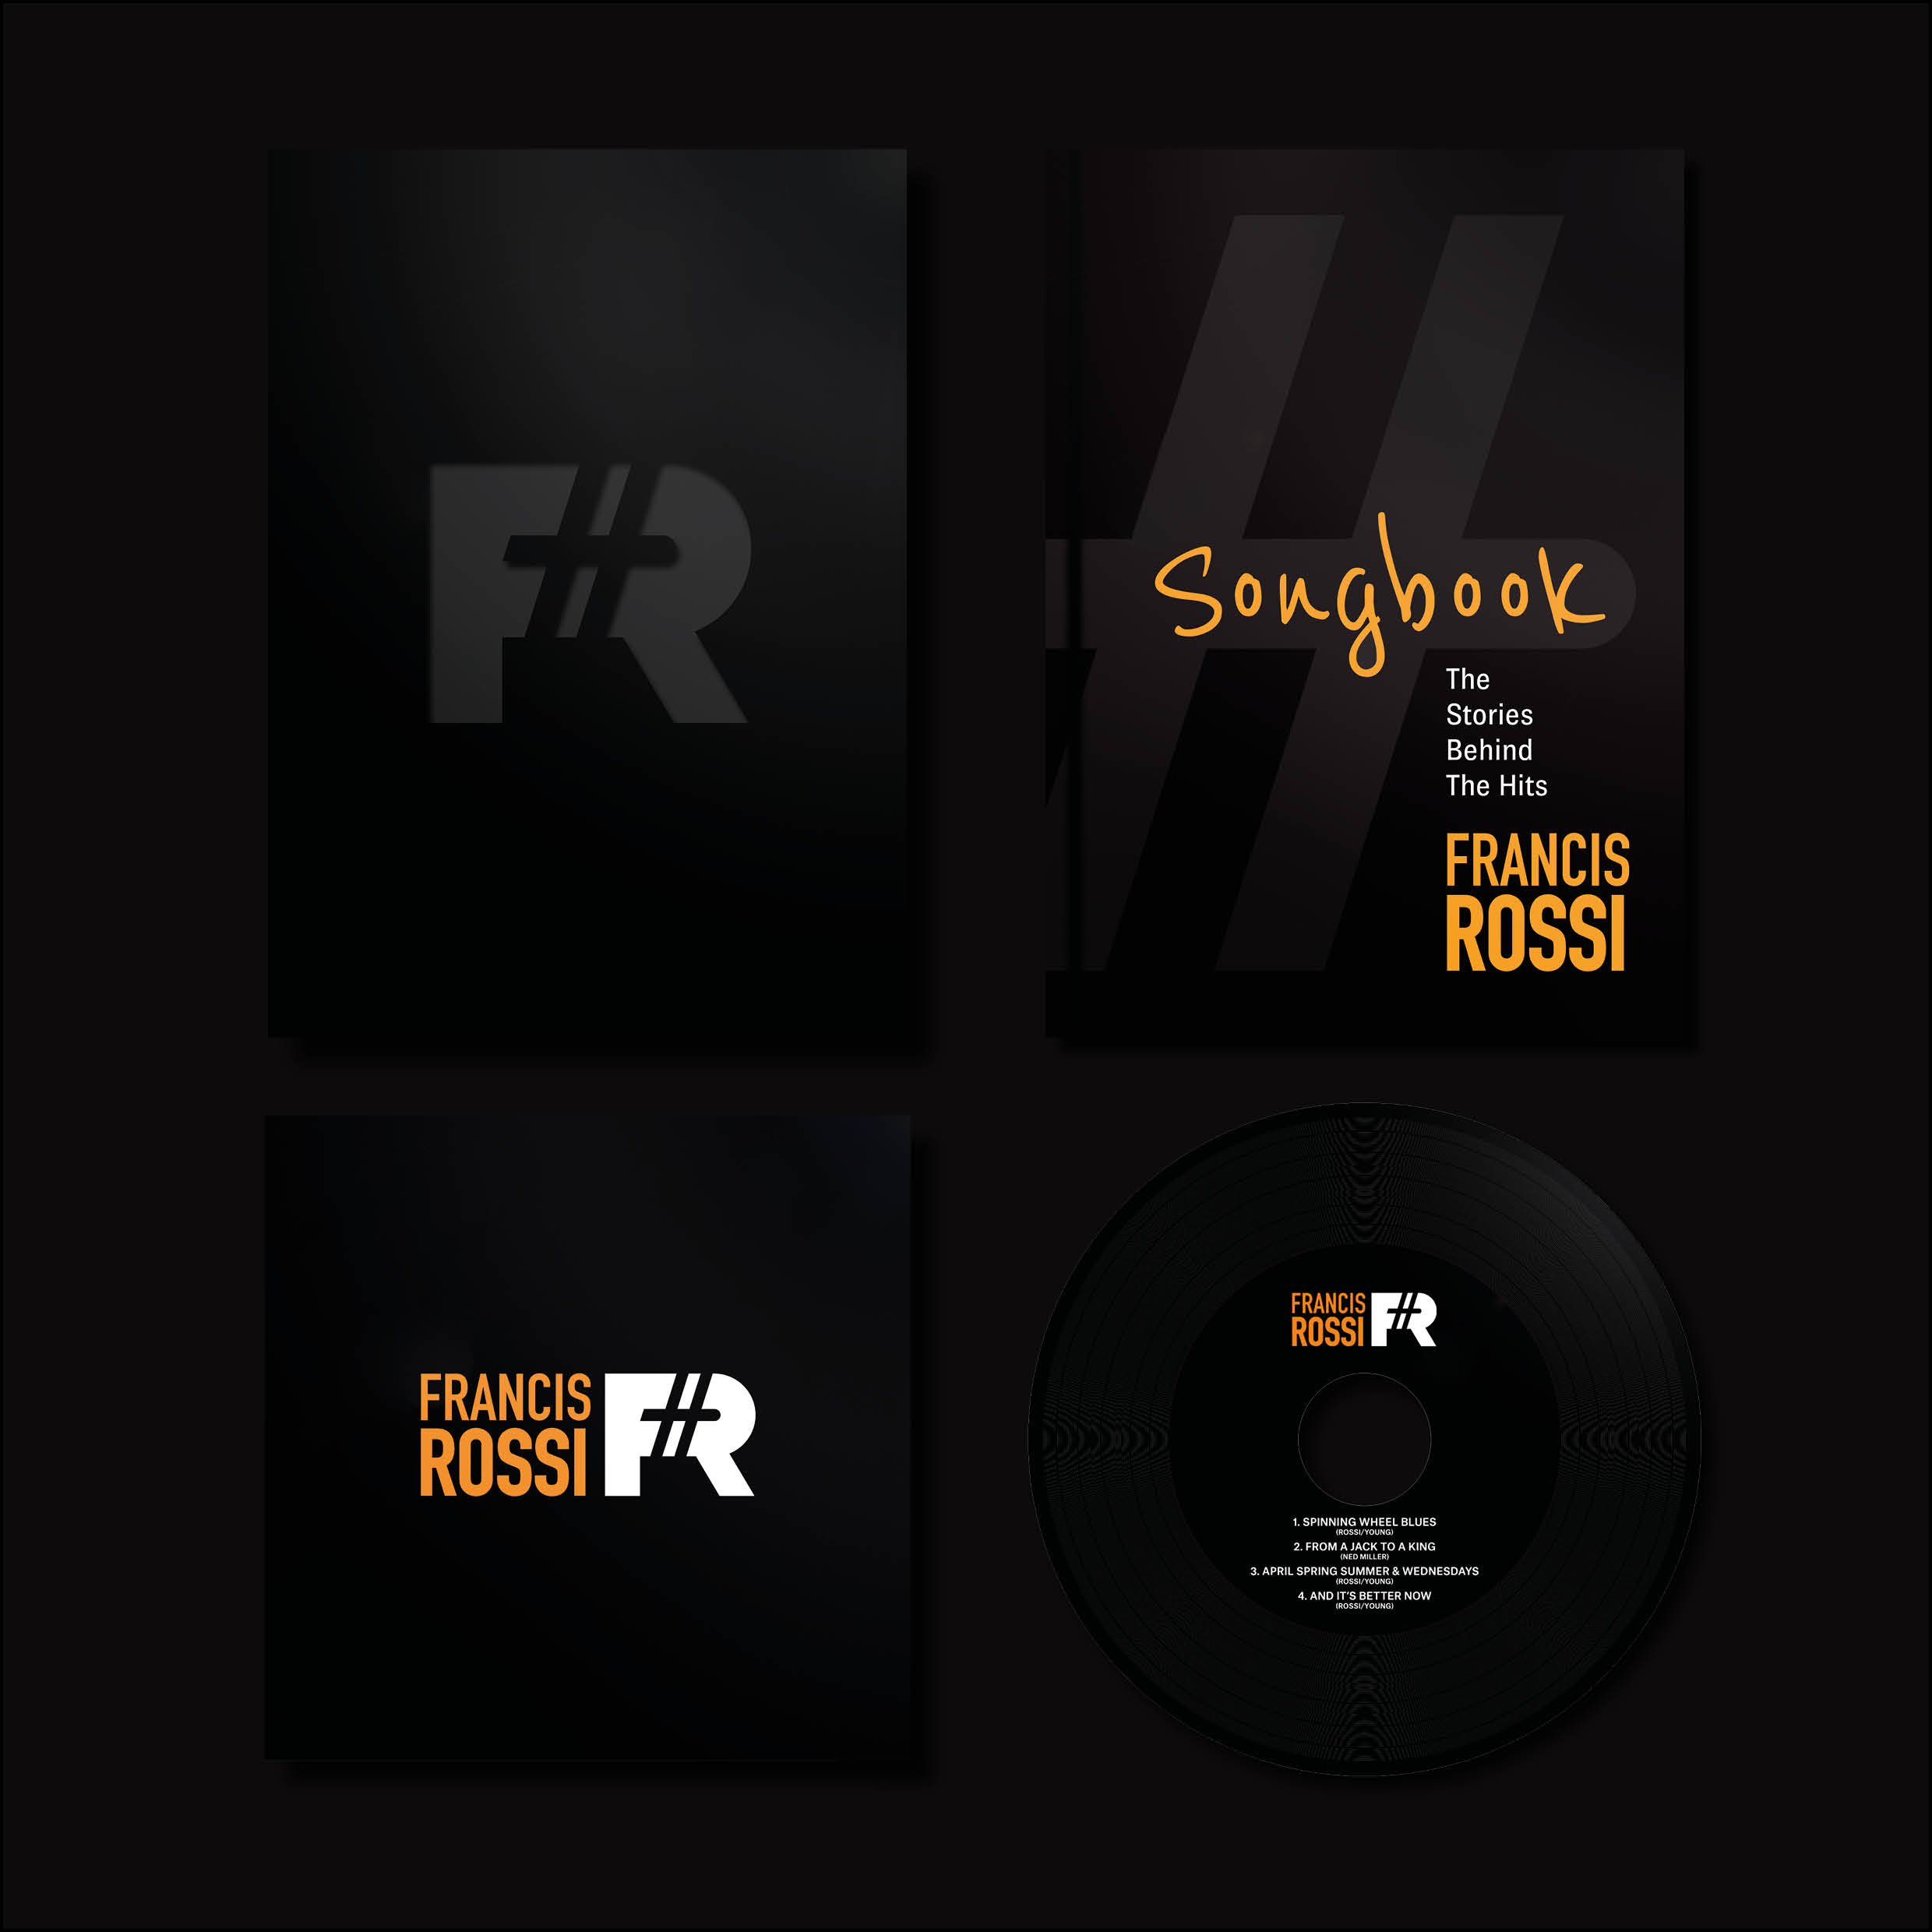 Songbook, By Francis Rossi